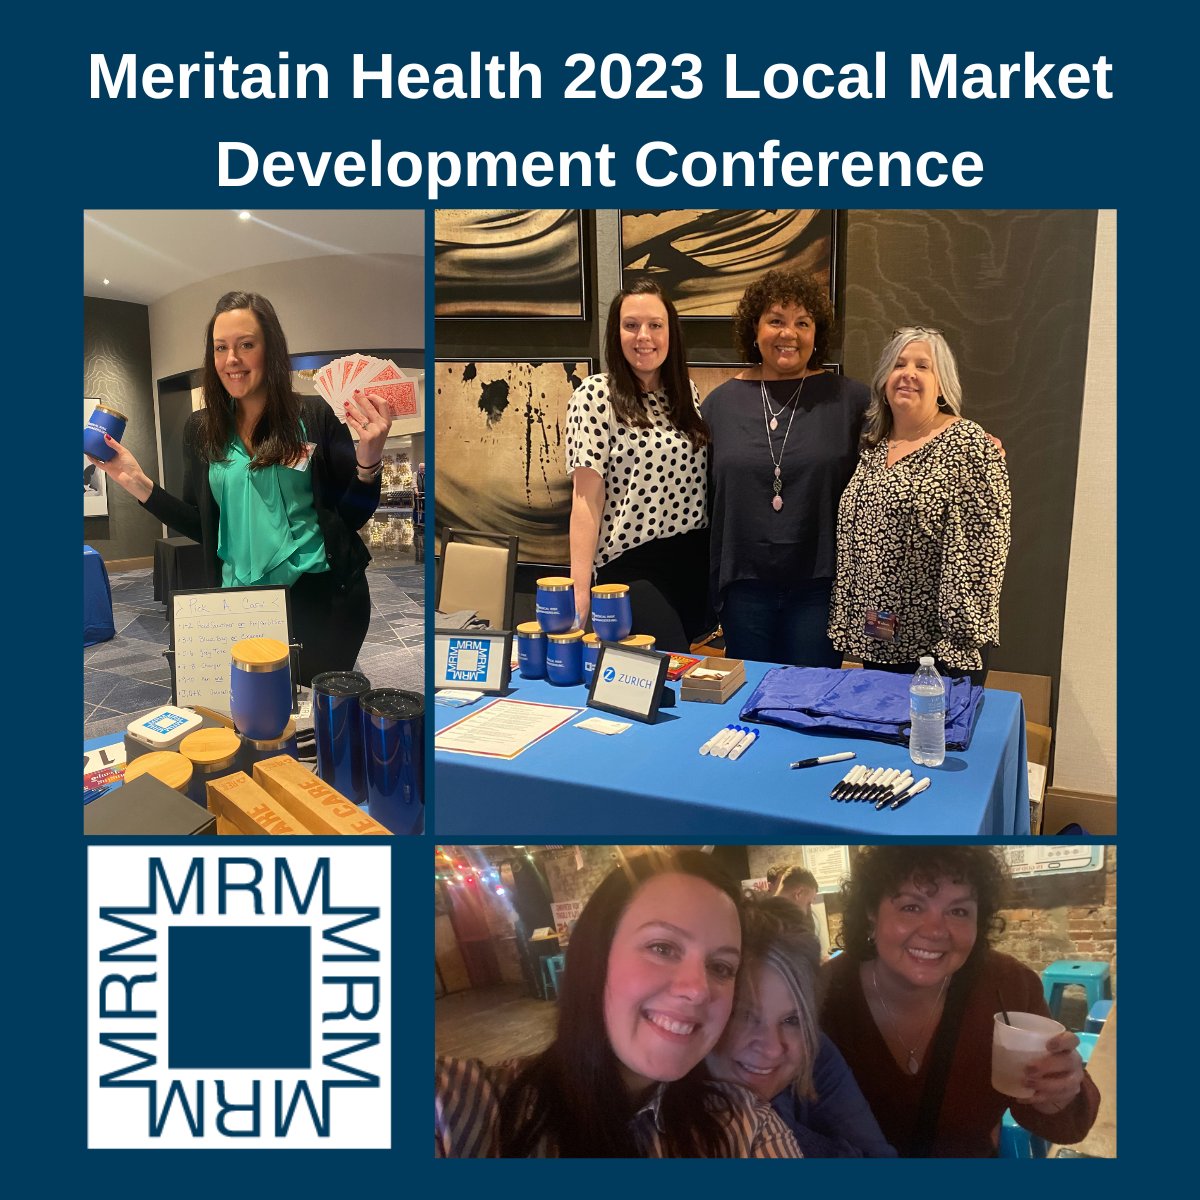 #TeamMRM had a GREAT time in Nashville at the Meritain Health 2023 Local Market Development Conference.